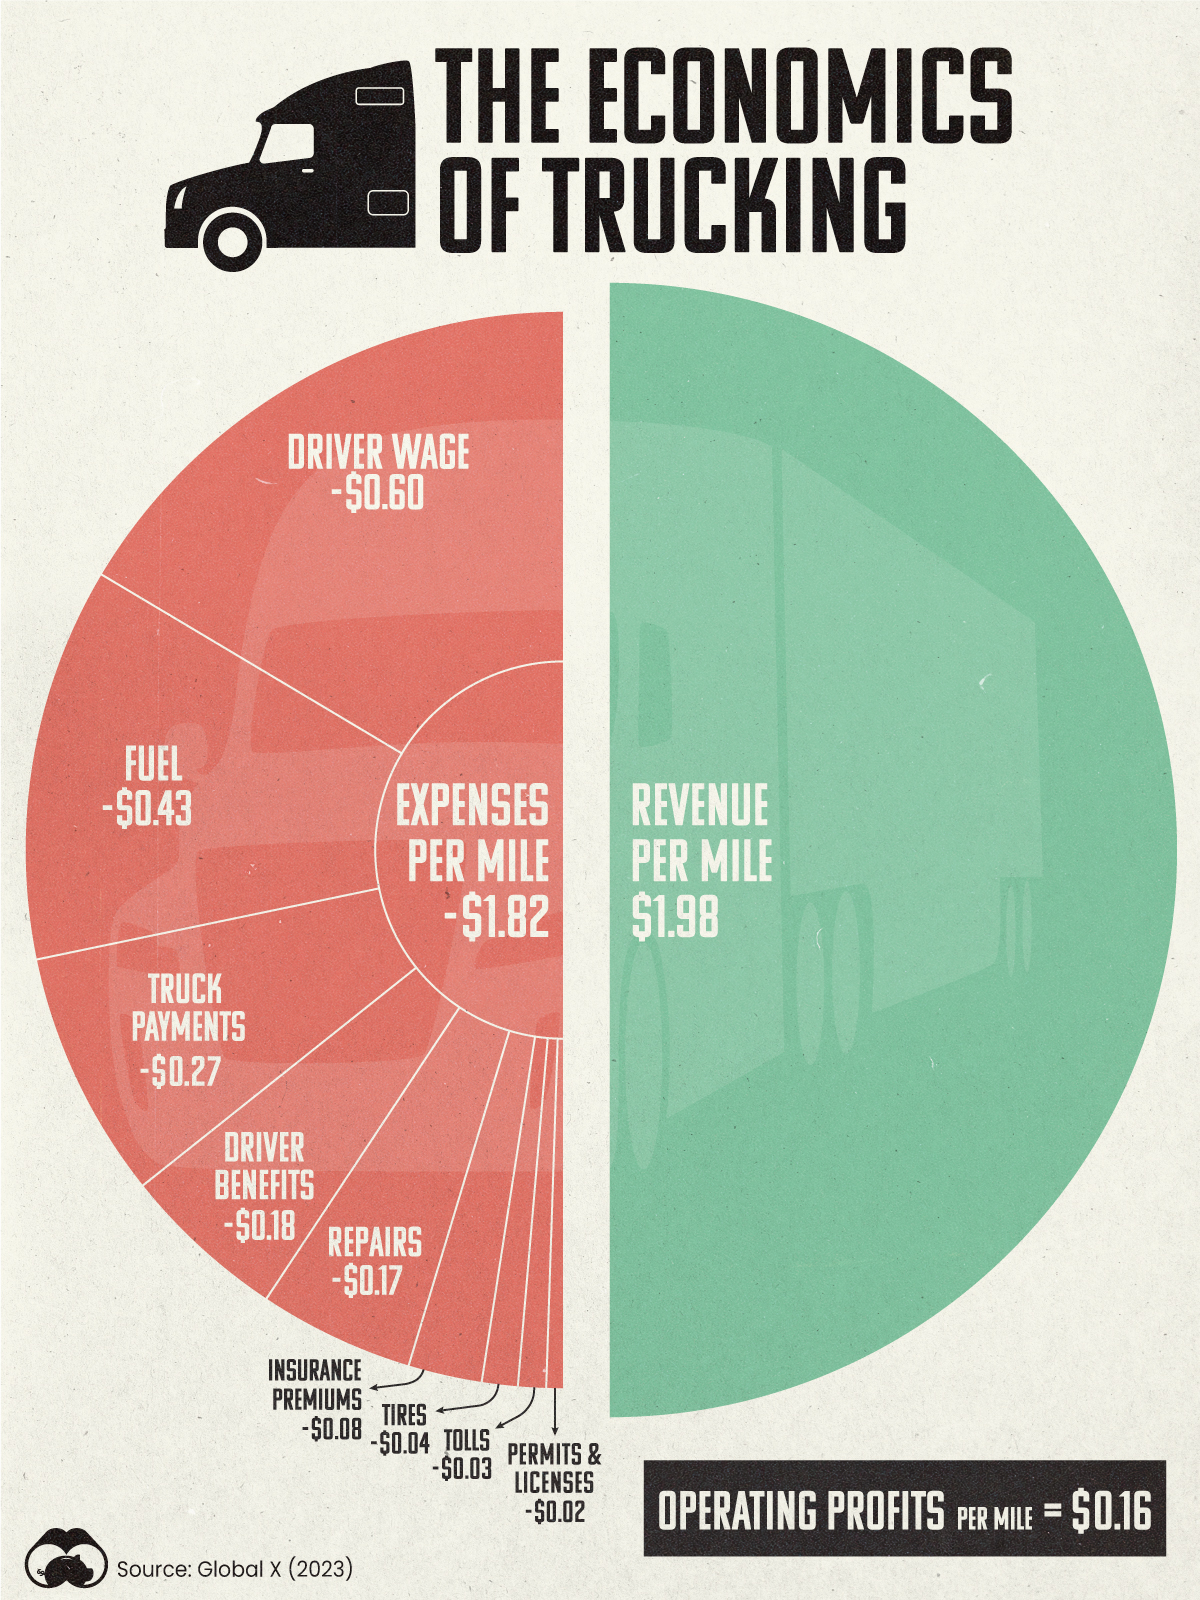 This graphic shows how trucking companies make money along with their expenses.